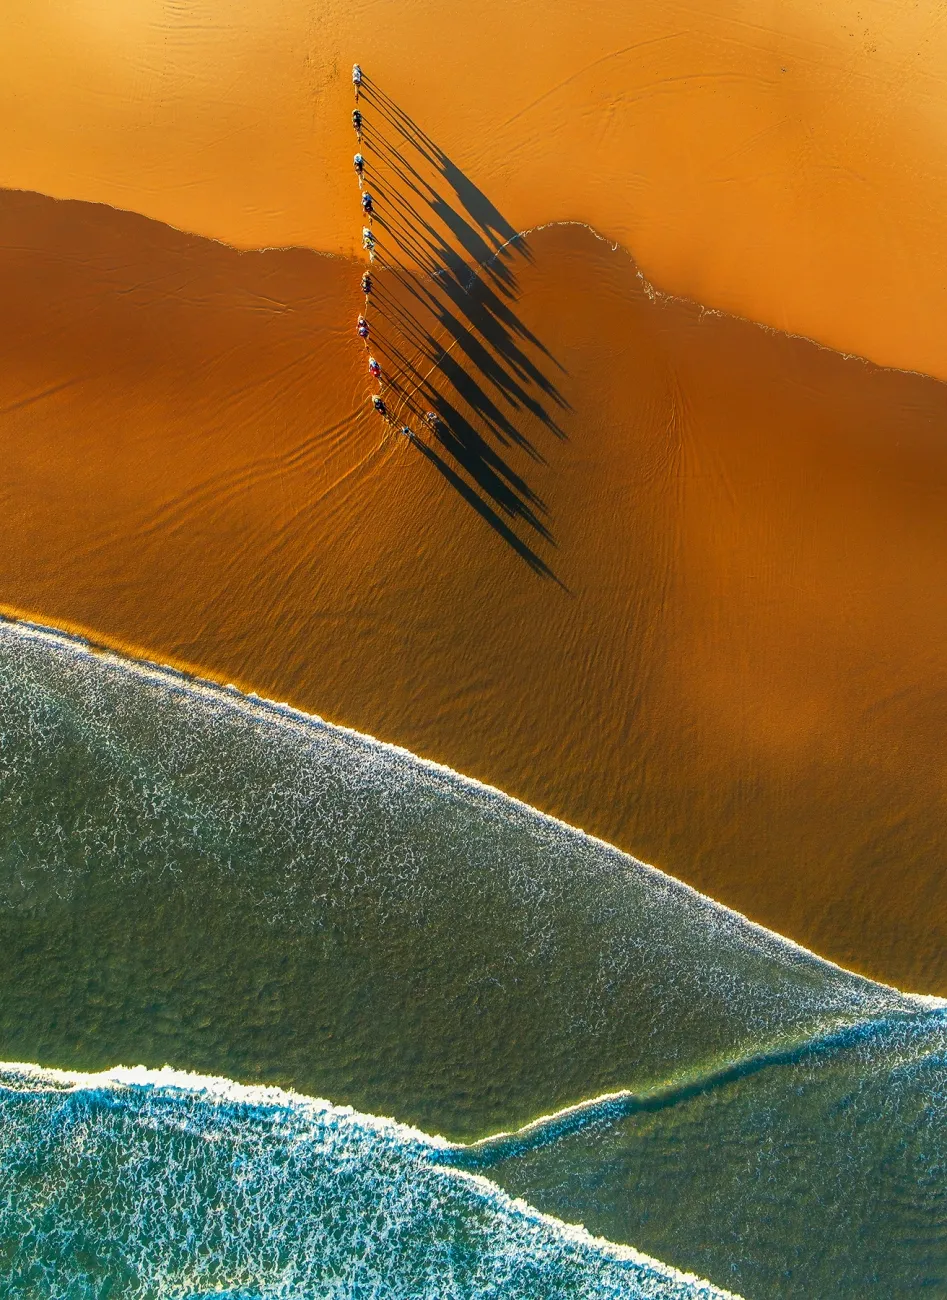 Aerial photo of a desert beach, with water breaking onto deep orange sand and a line of camels, being ridden by people, casts shadows.